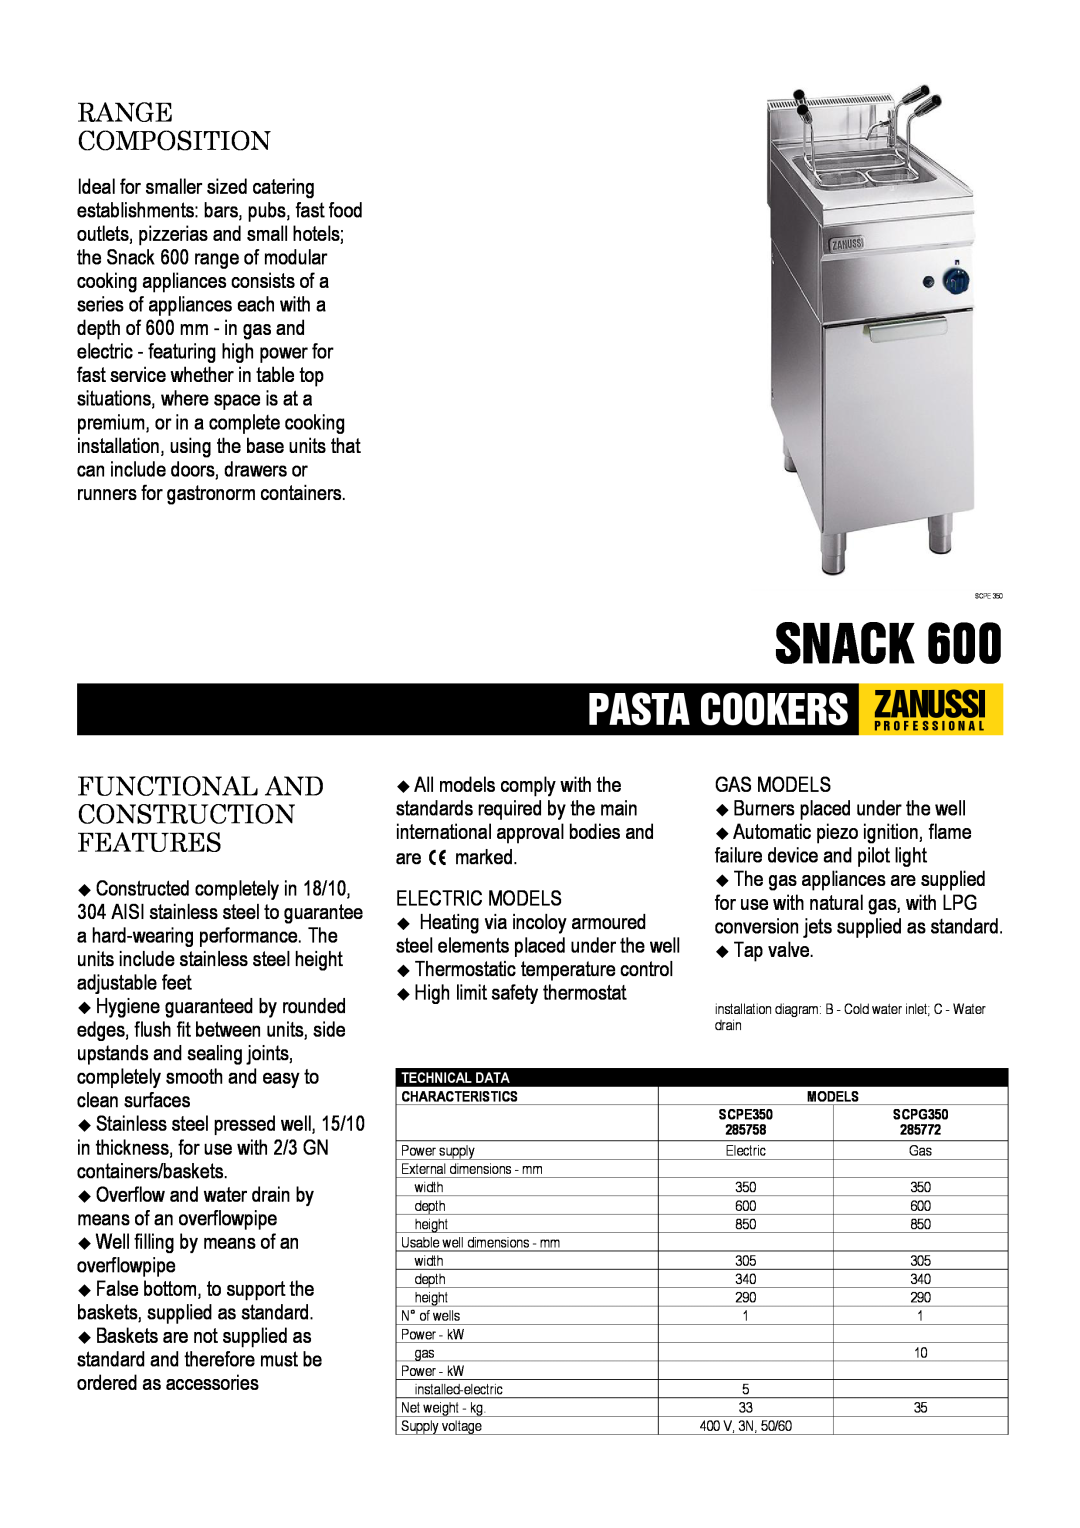 Zanussi SCPG350, SCPE350, 285758, 285772 dimensions Snack, Range Composition, Functional And Construction Features 